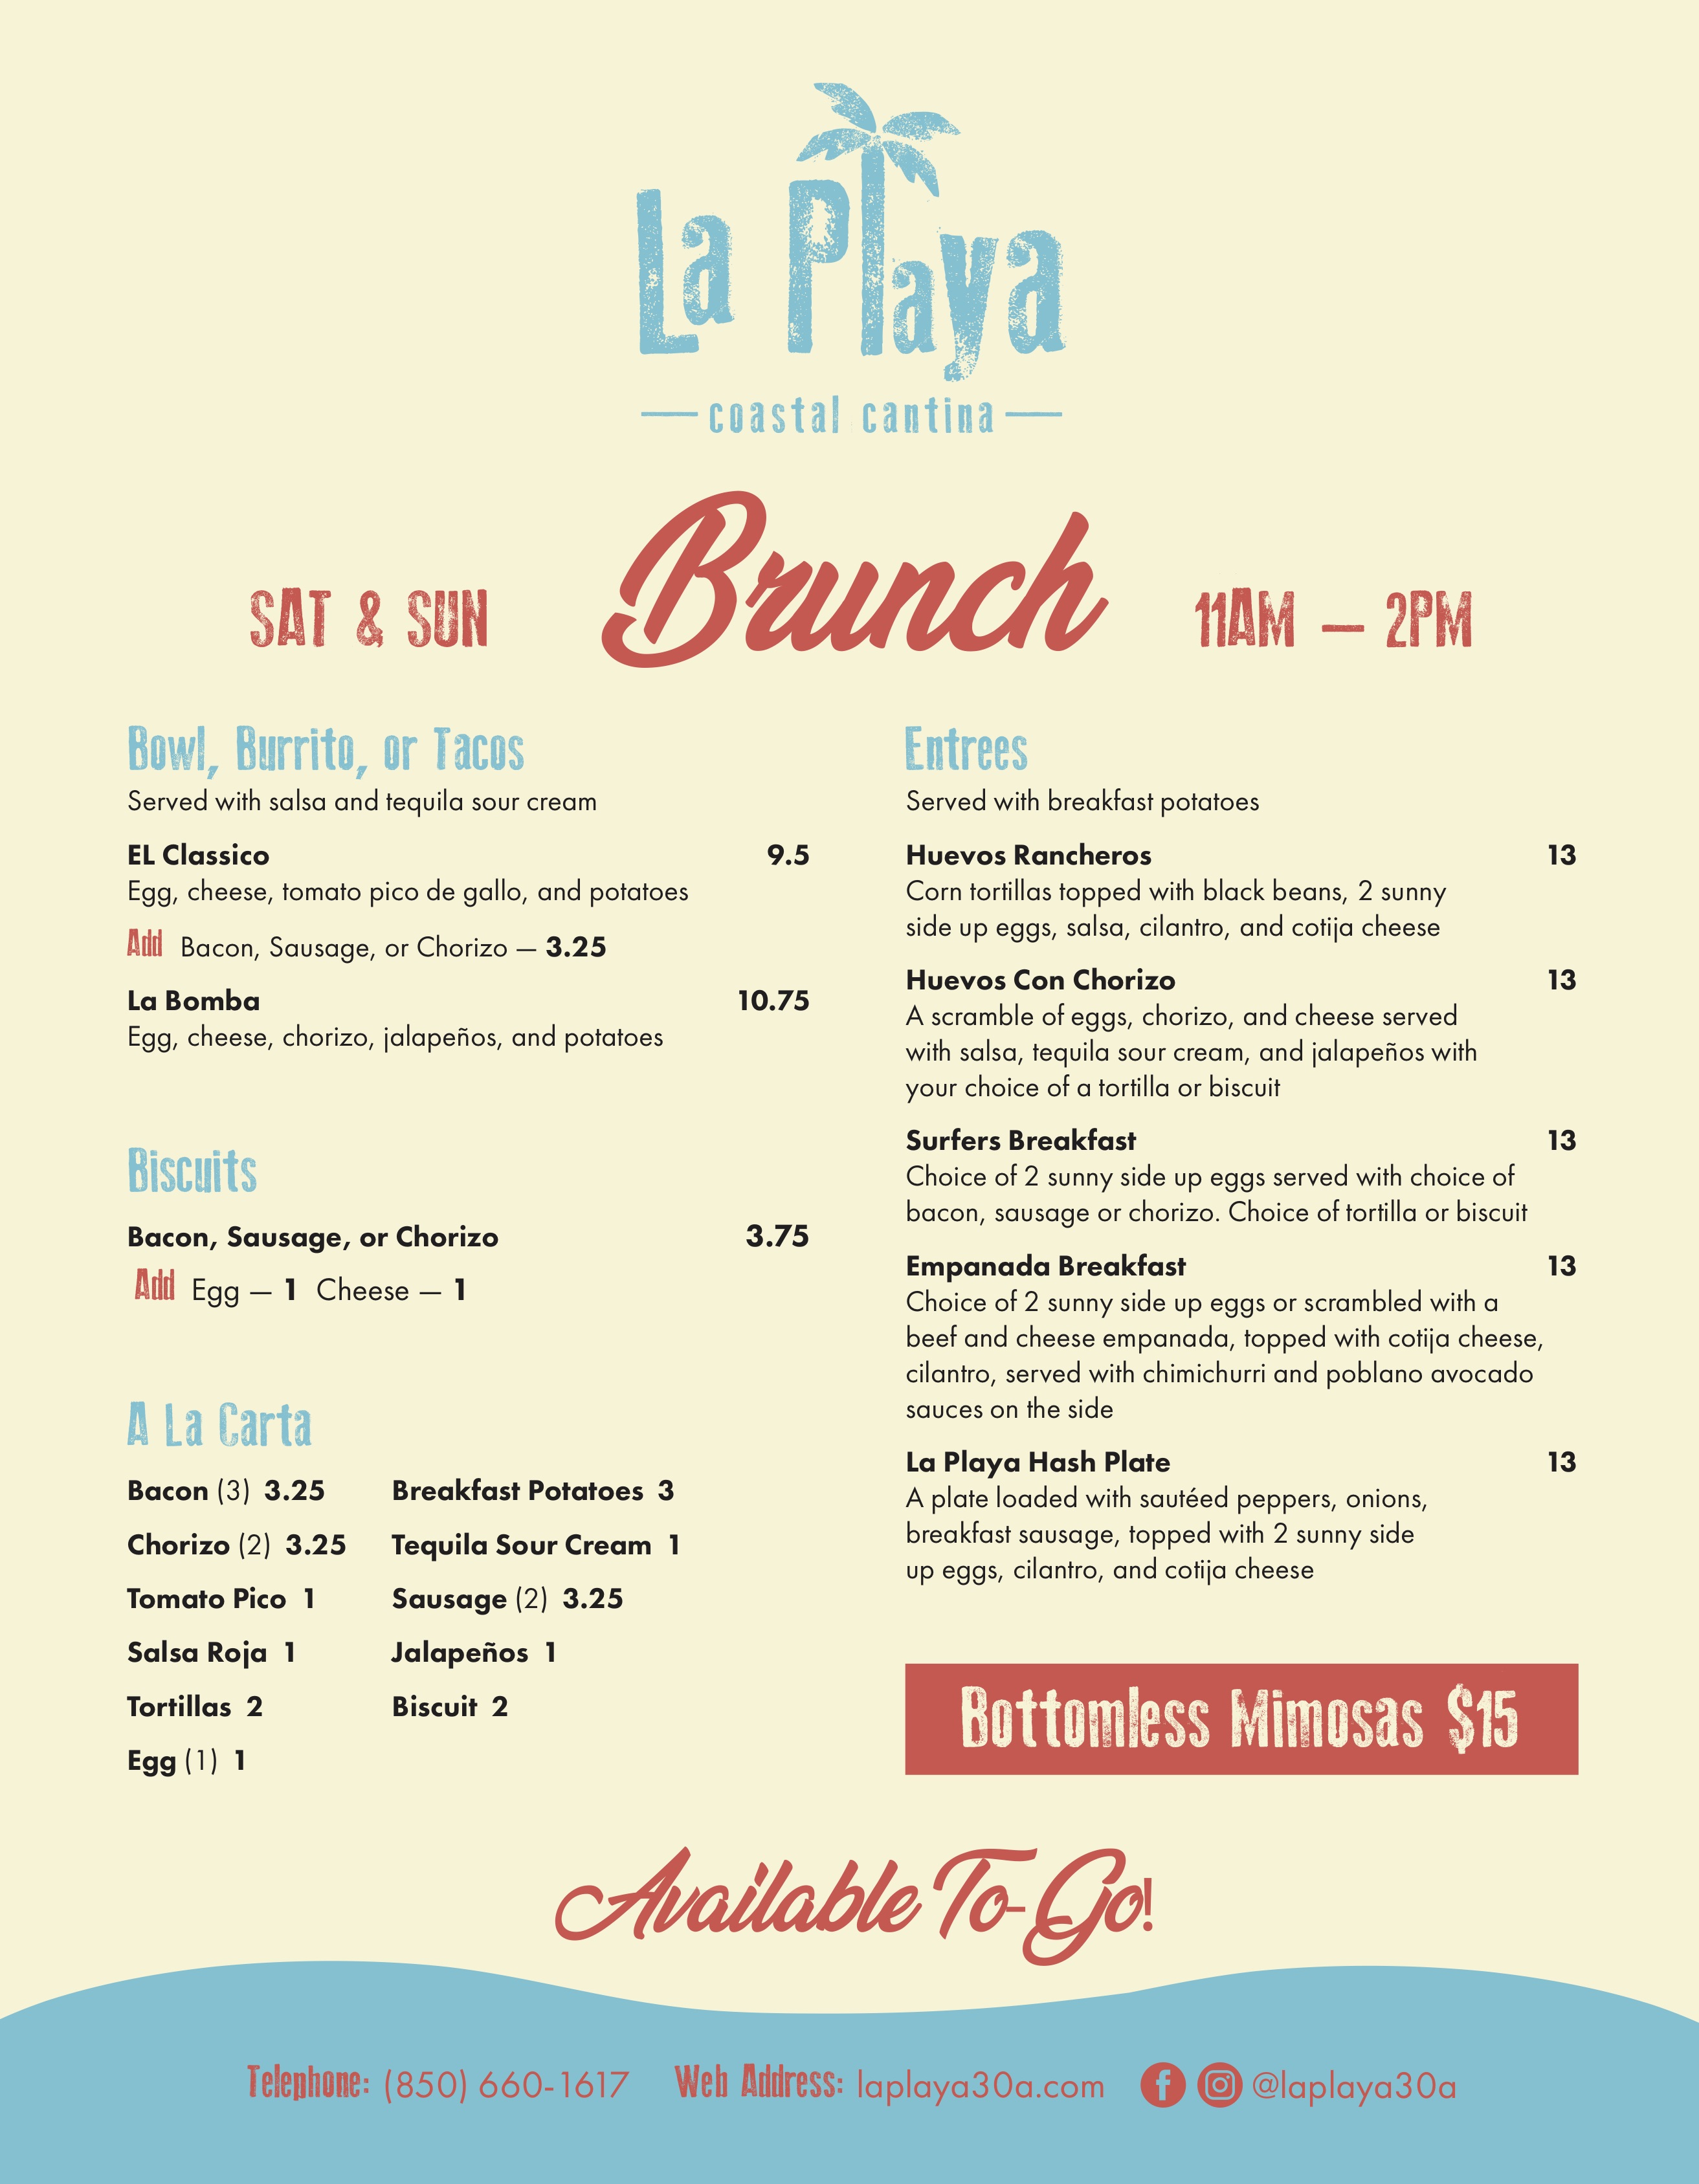 La Playa in Gulf Place to Offer Brunch on Saturdays and Sundays